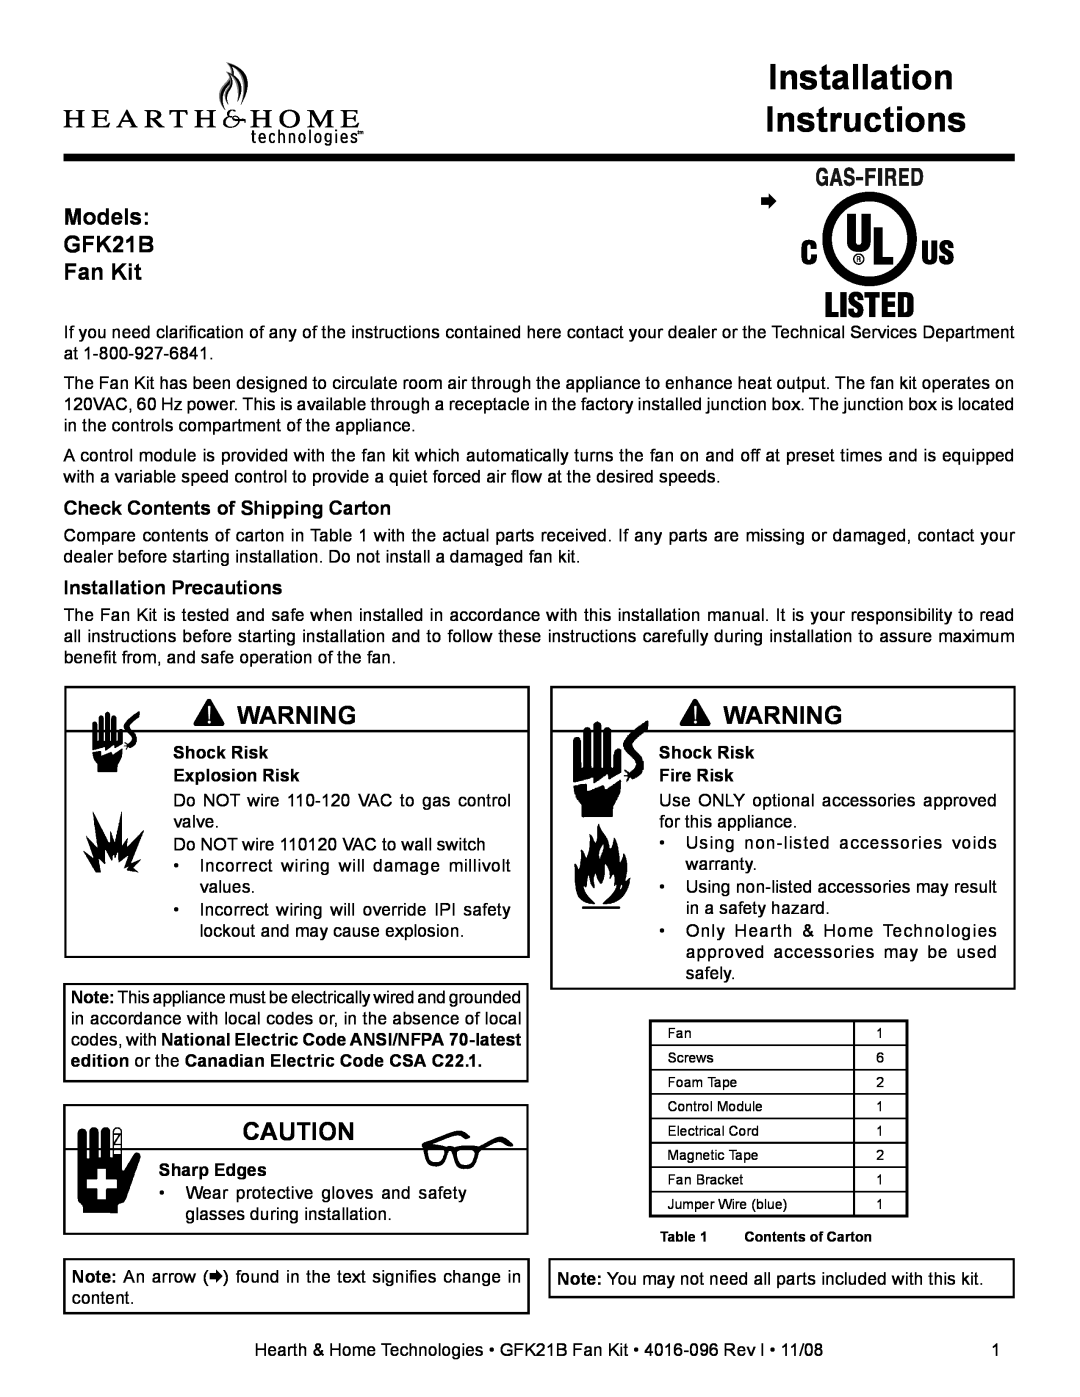 Hearth and Home Technologies GFK21B installation instructions Check Contents of Shipping Carton, Installation Precautions 